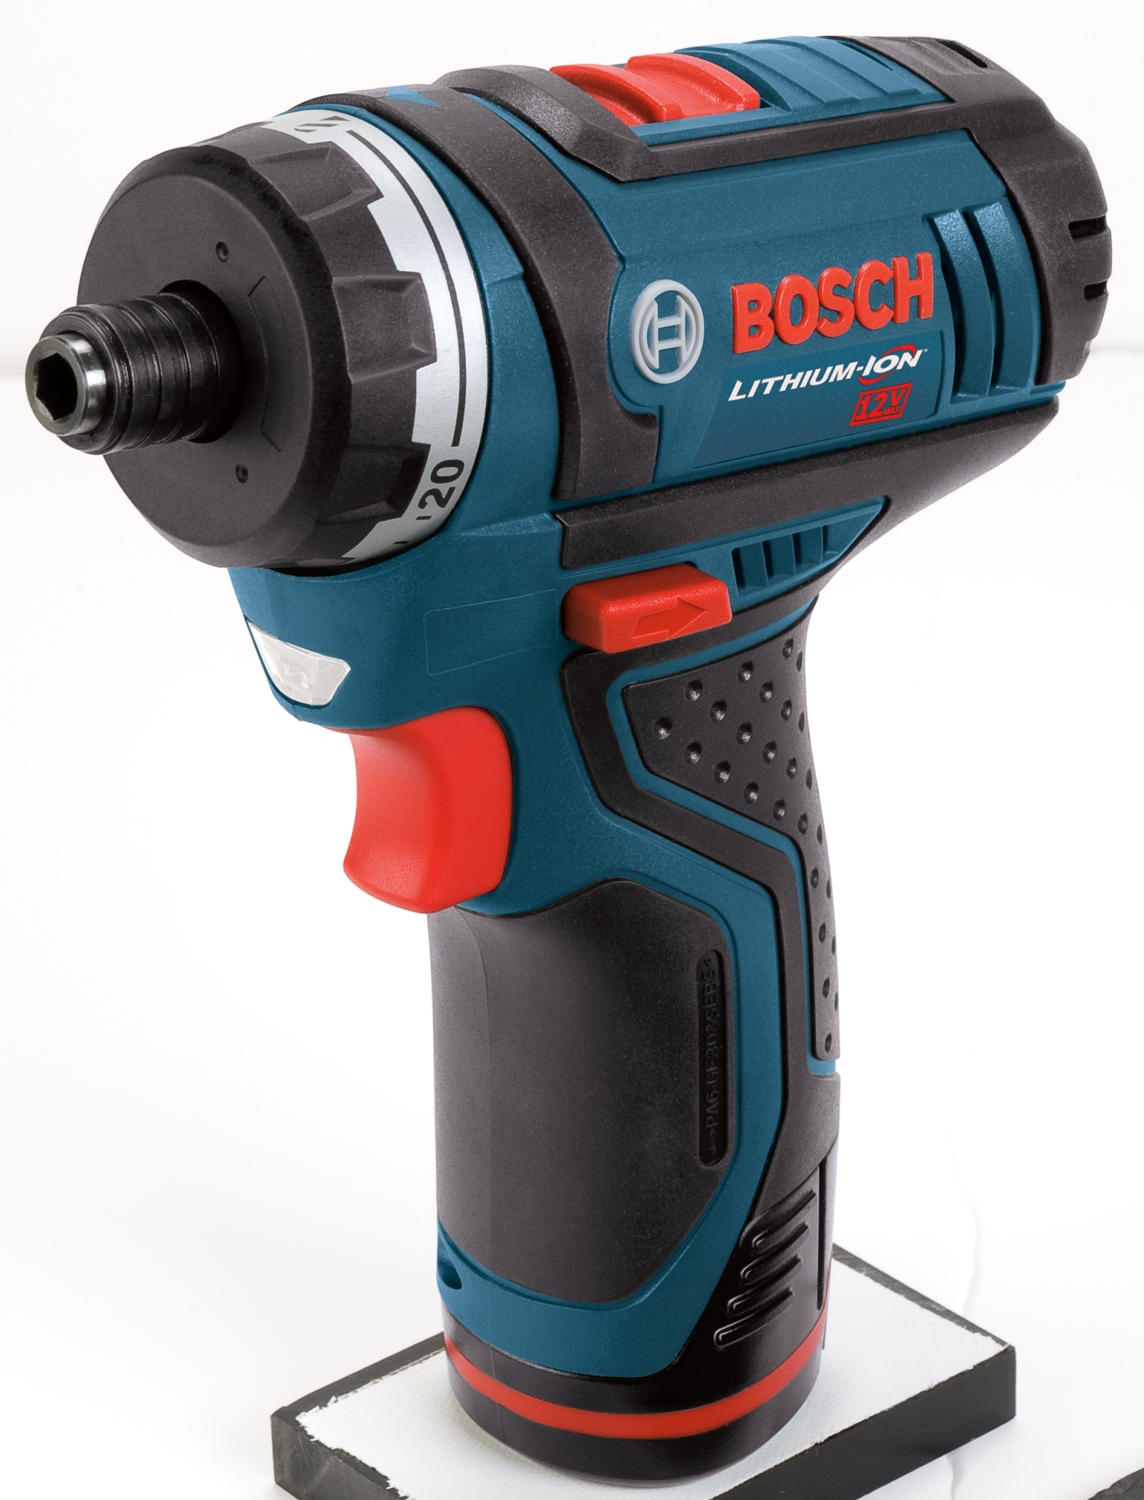 Reviewing the Bosch PS 21 Pocket Driver